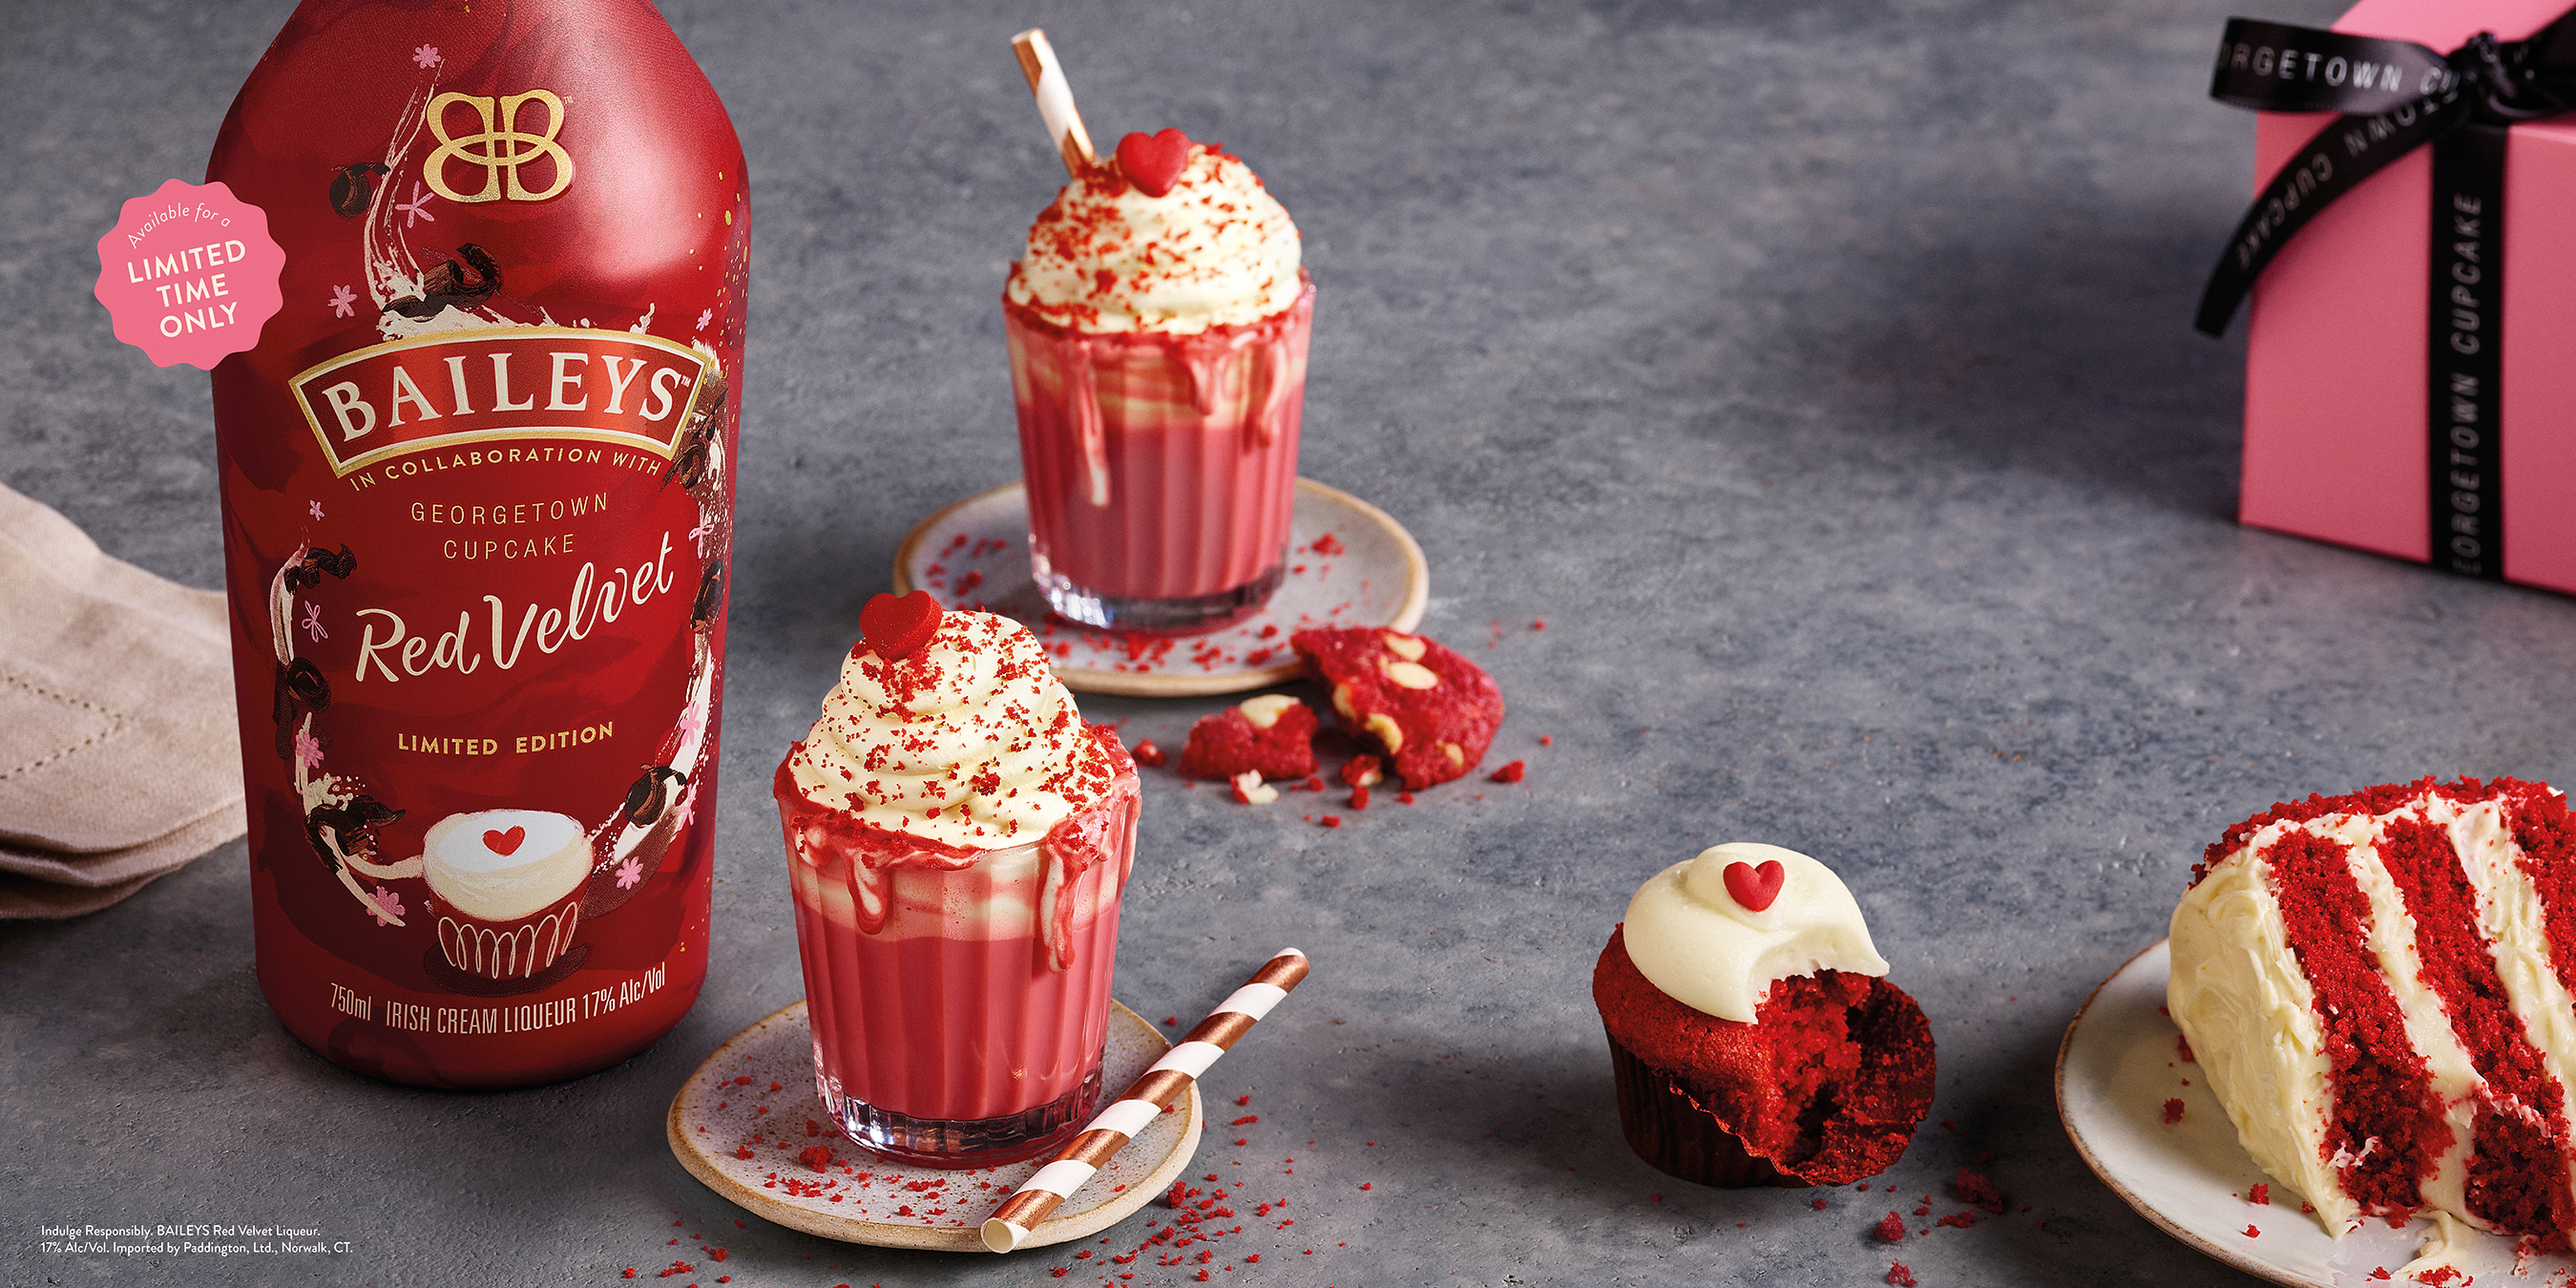 Save Room For Dessert! Baileys And Georgetown Cupcake Bring Back Baileys Red Velvet Just In Time For National Dessert Day!